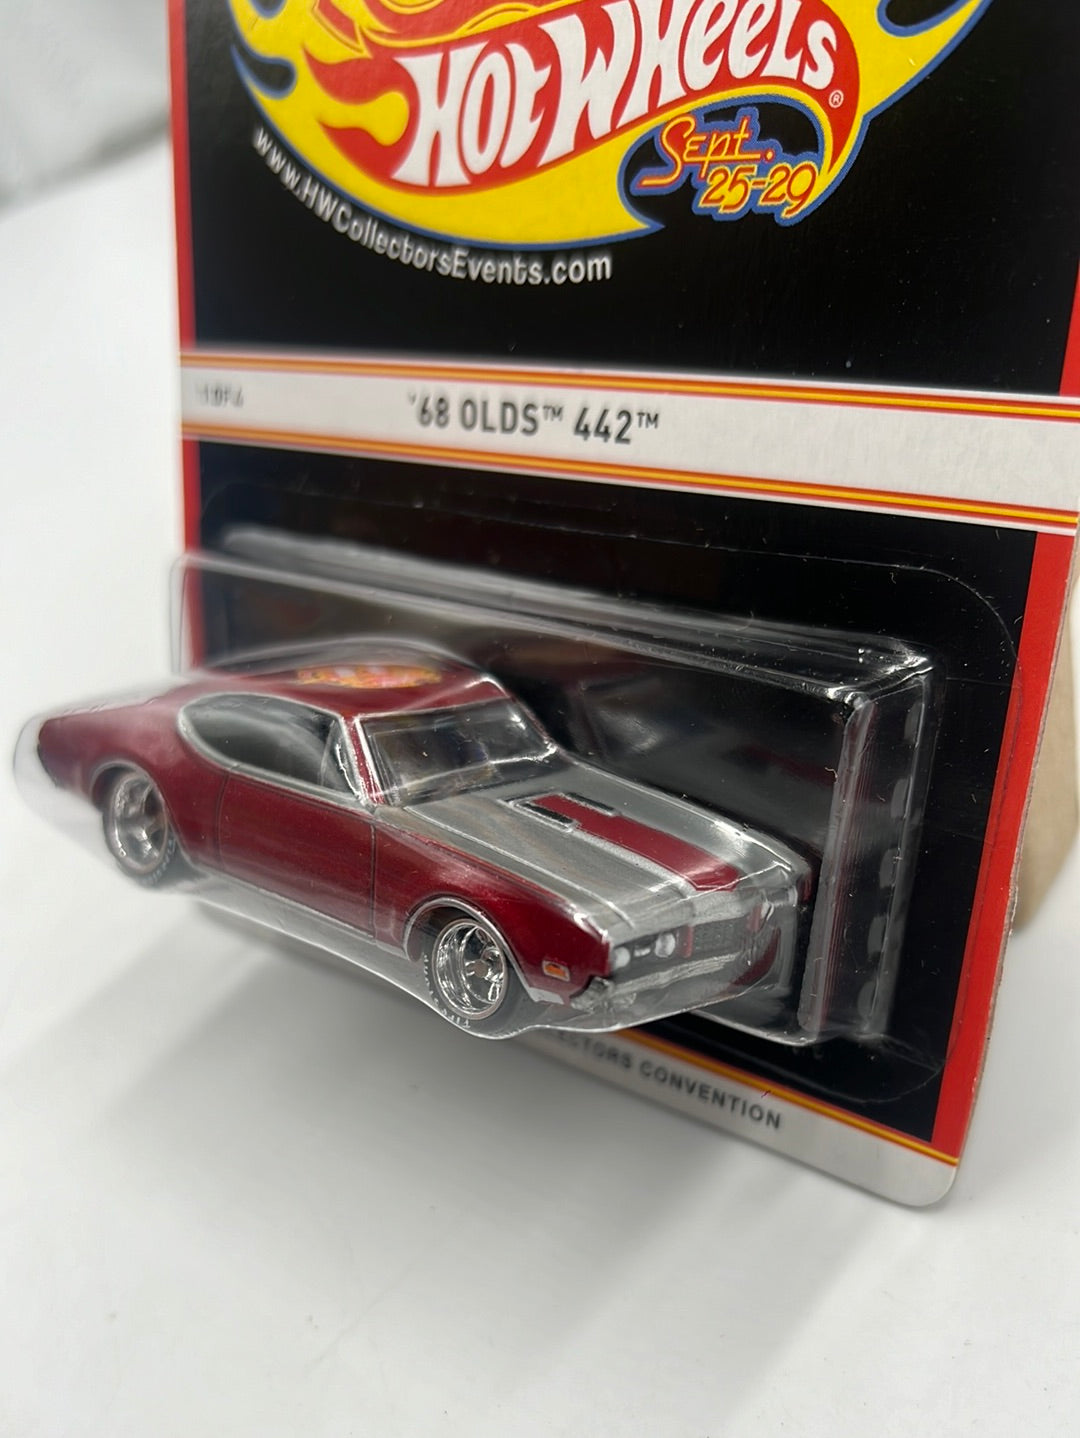 2013 Hot Wheels 27th Annual Collectors Convention ‘68 Olds 442 Low Number 189/1100